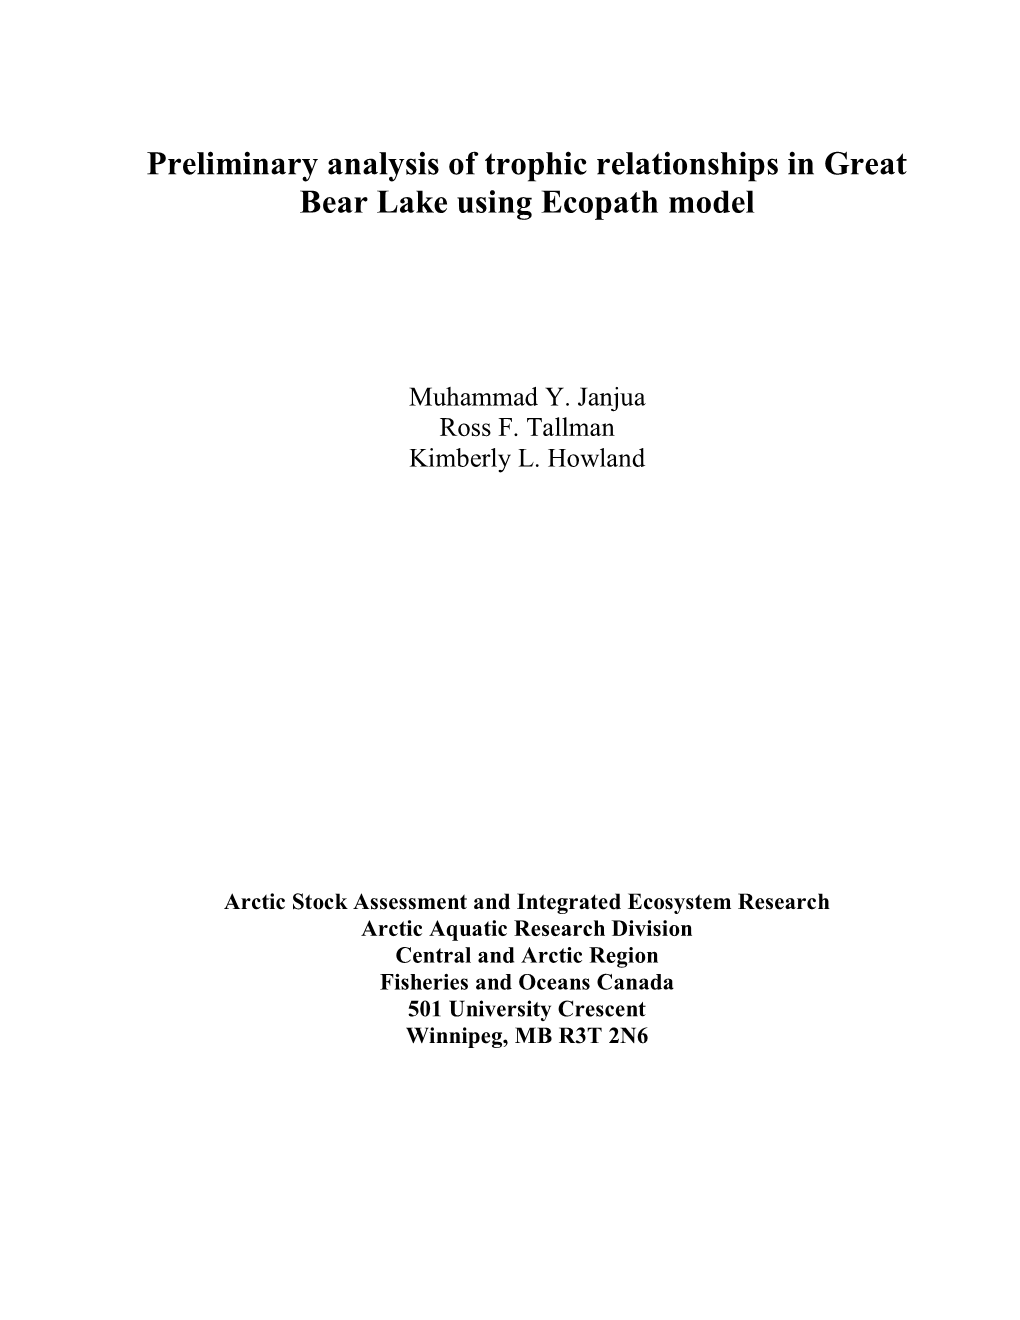 Preliminary Analysis of Trophic Relationships in Great Bear Lake Using Ecopath Model